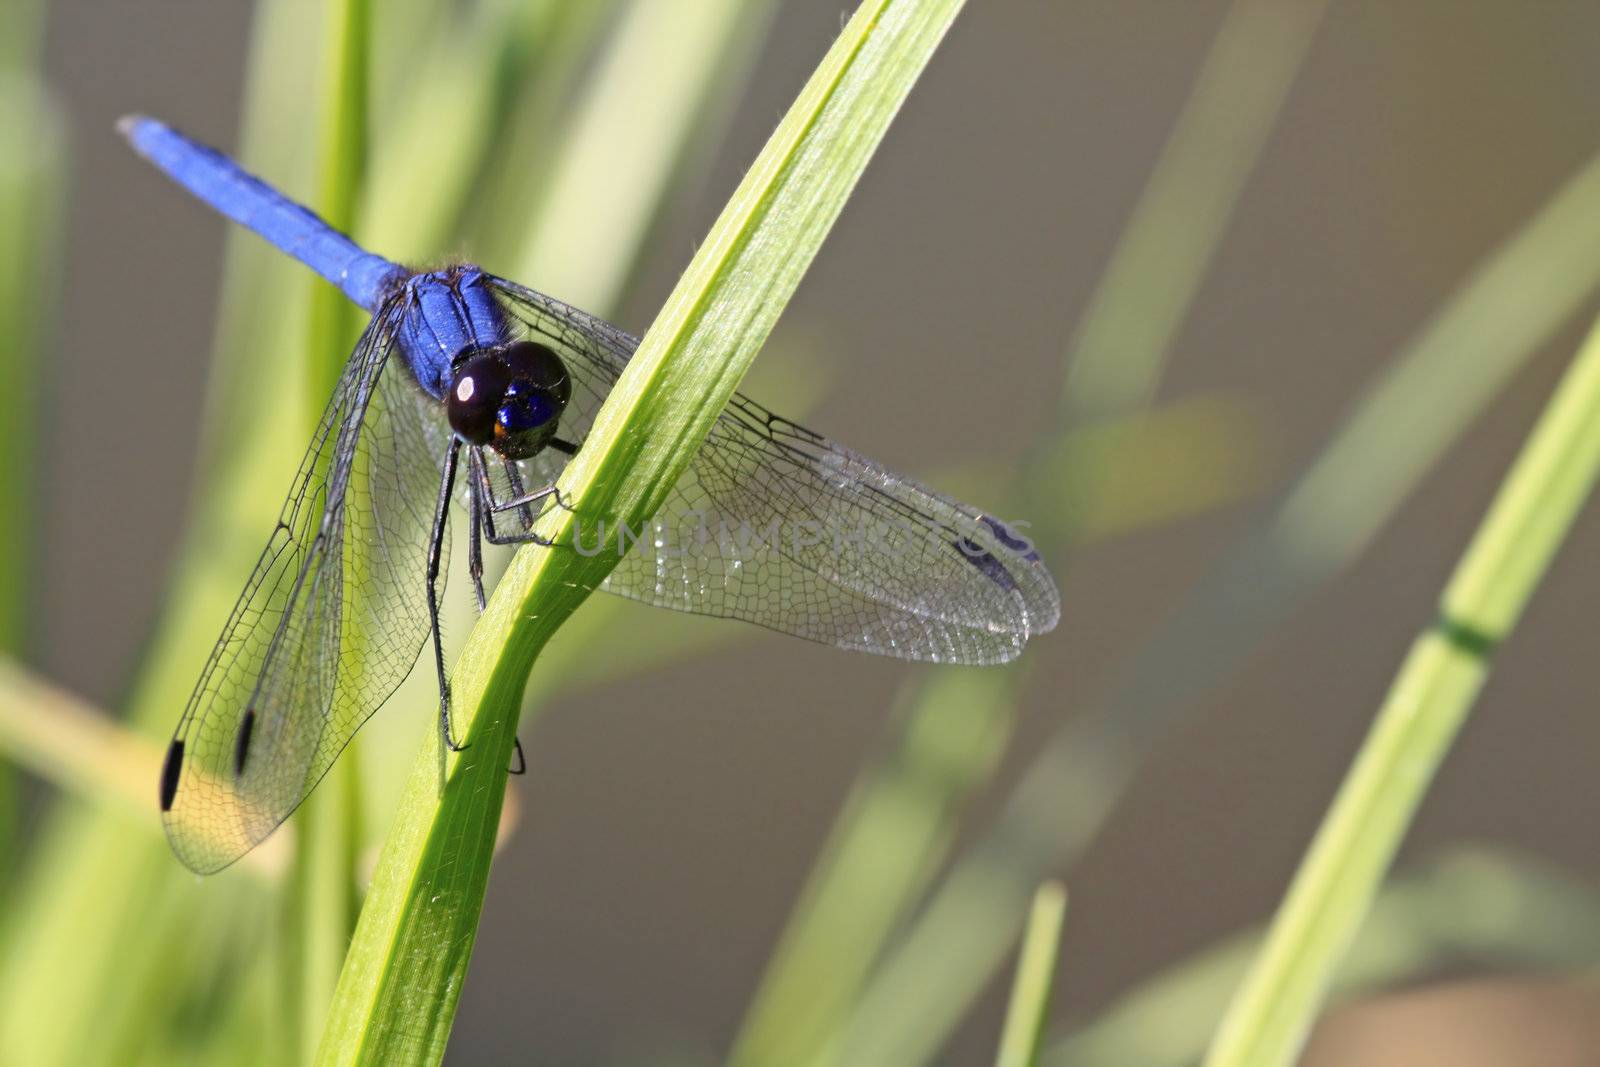 Big blue dragonfly clutching onto a blade of grass